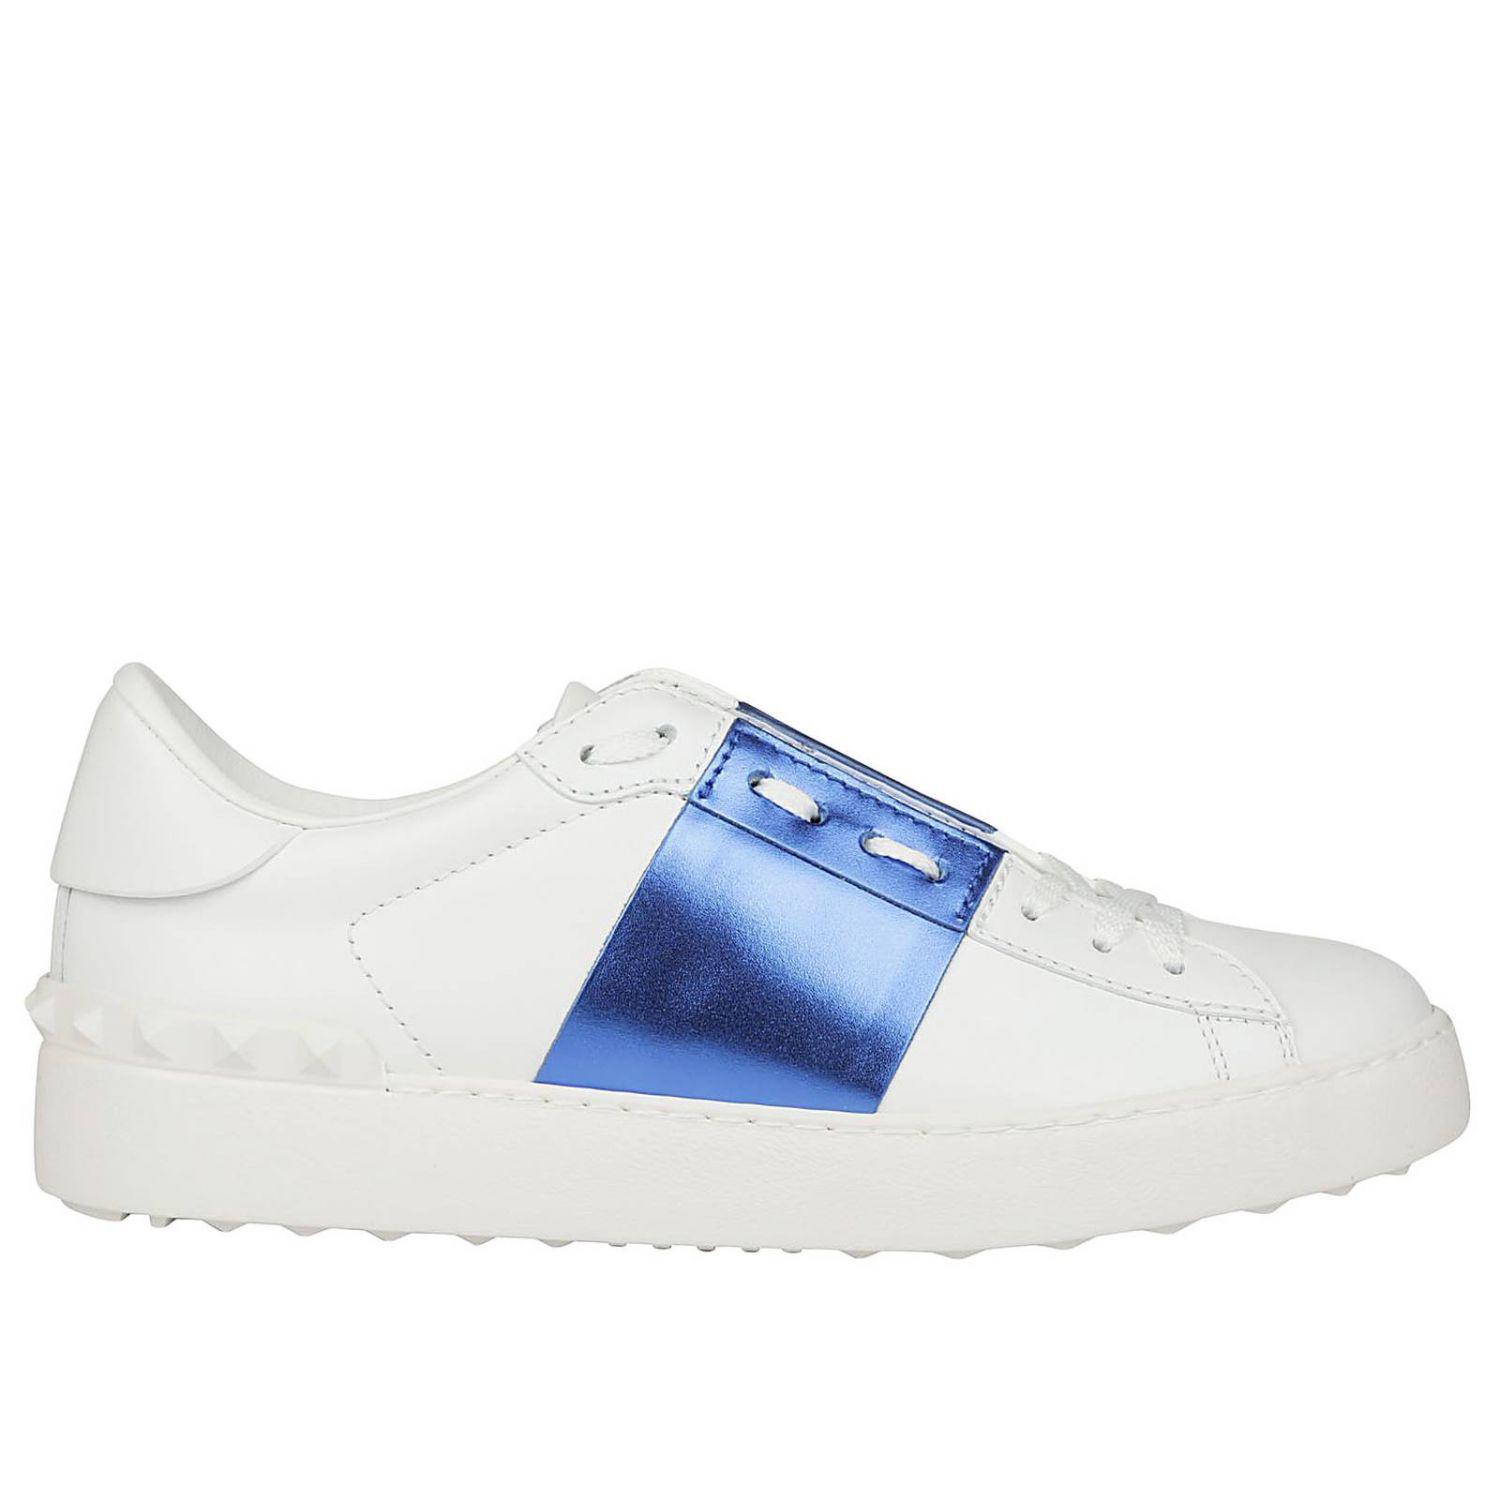 valentino rockstud sneakers womens Online Store & Free Shipping